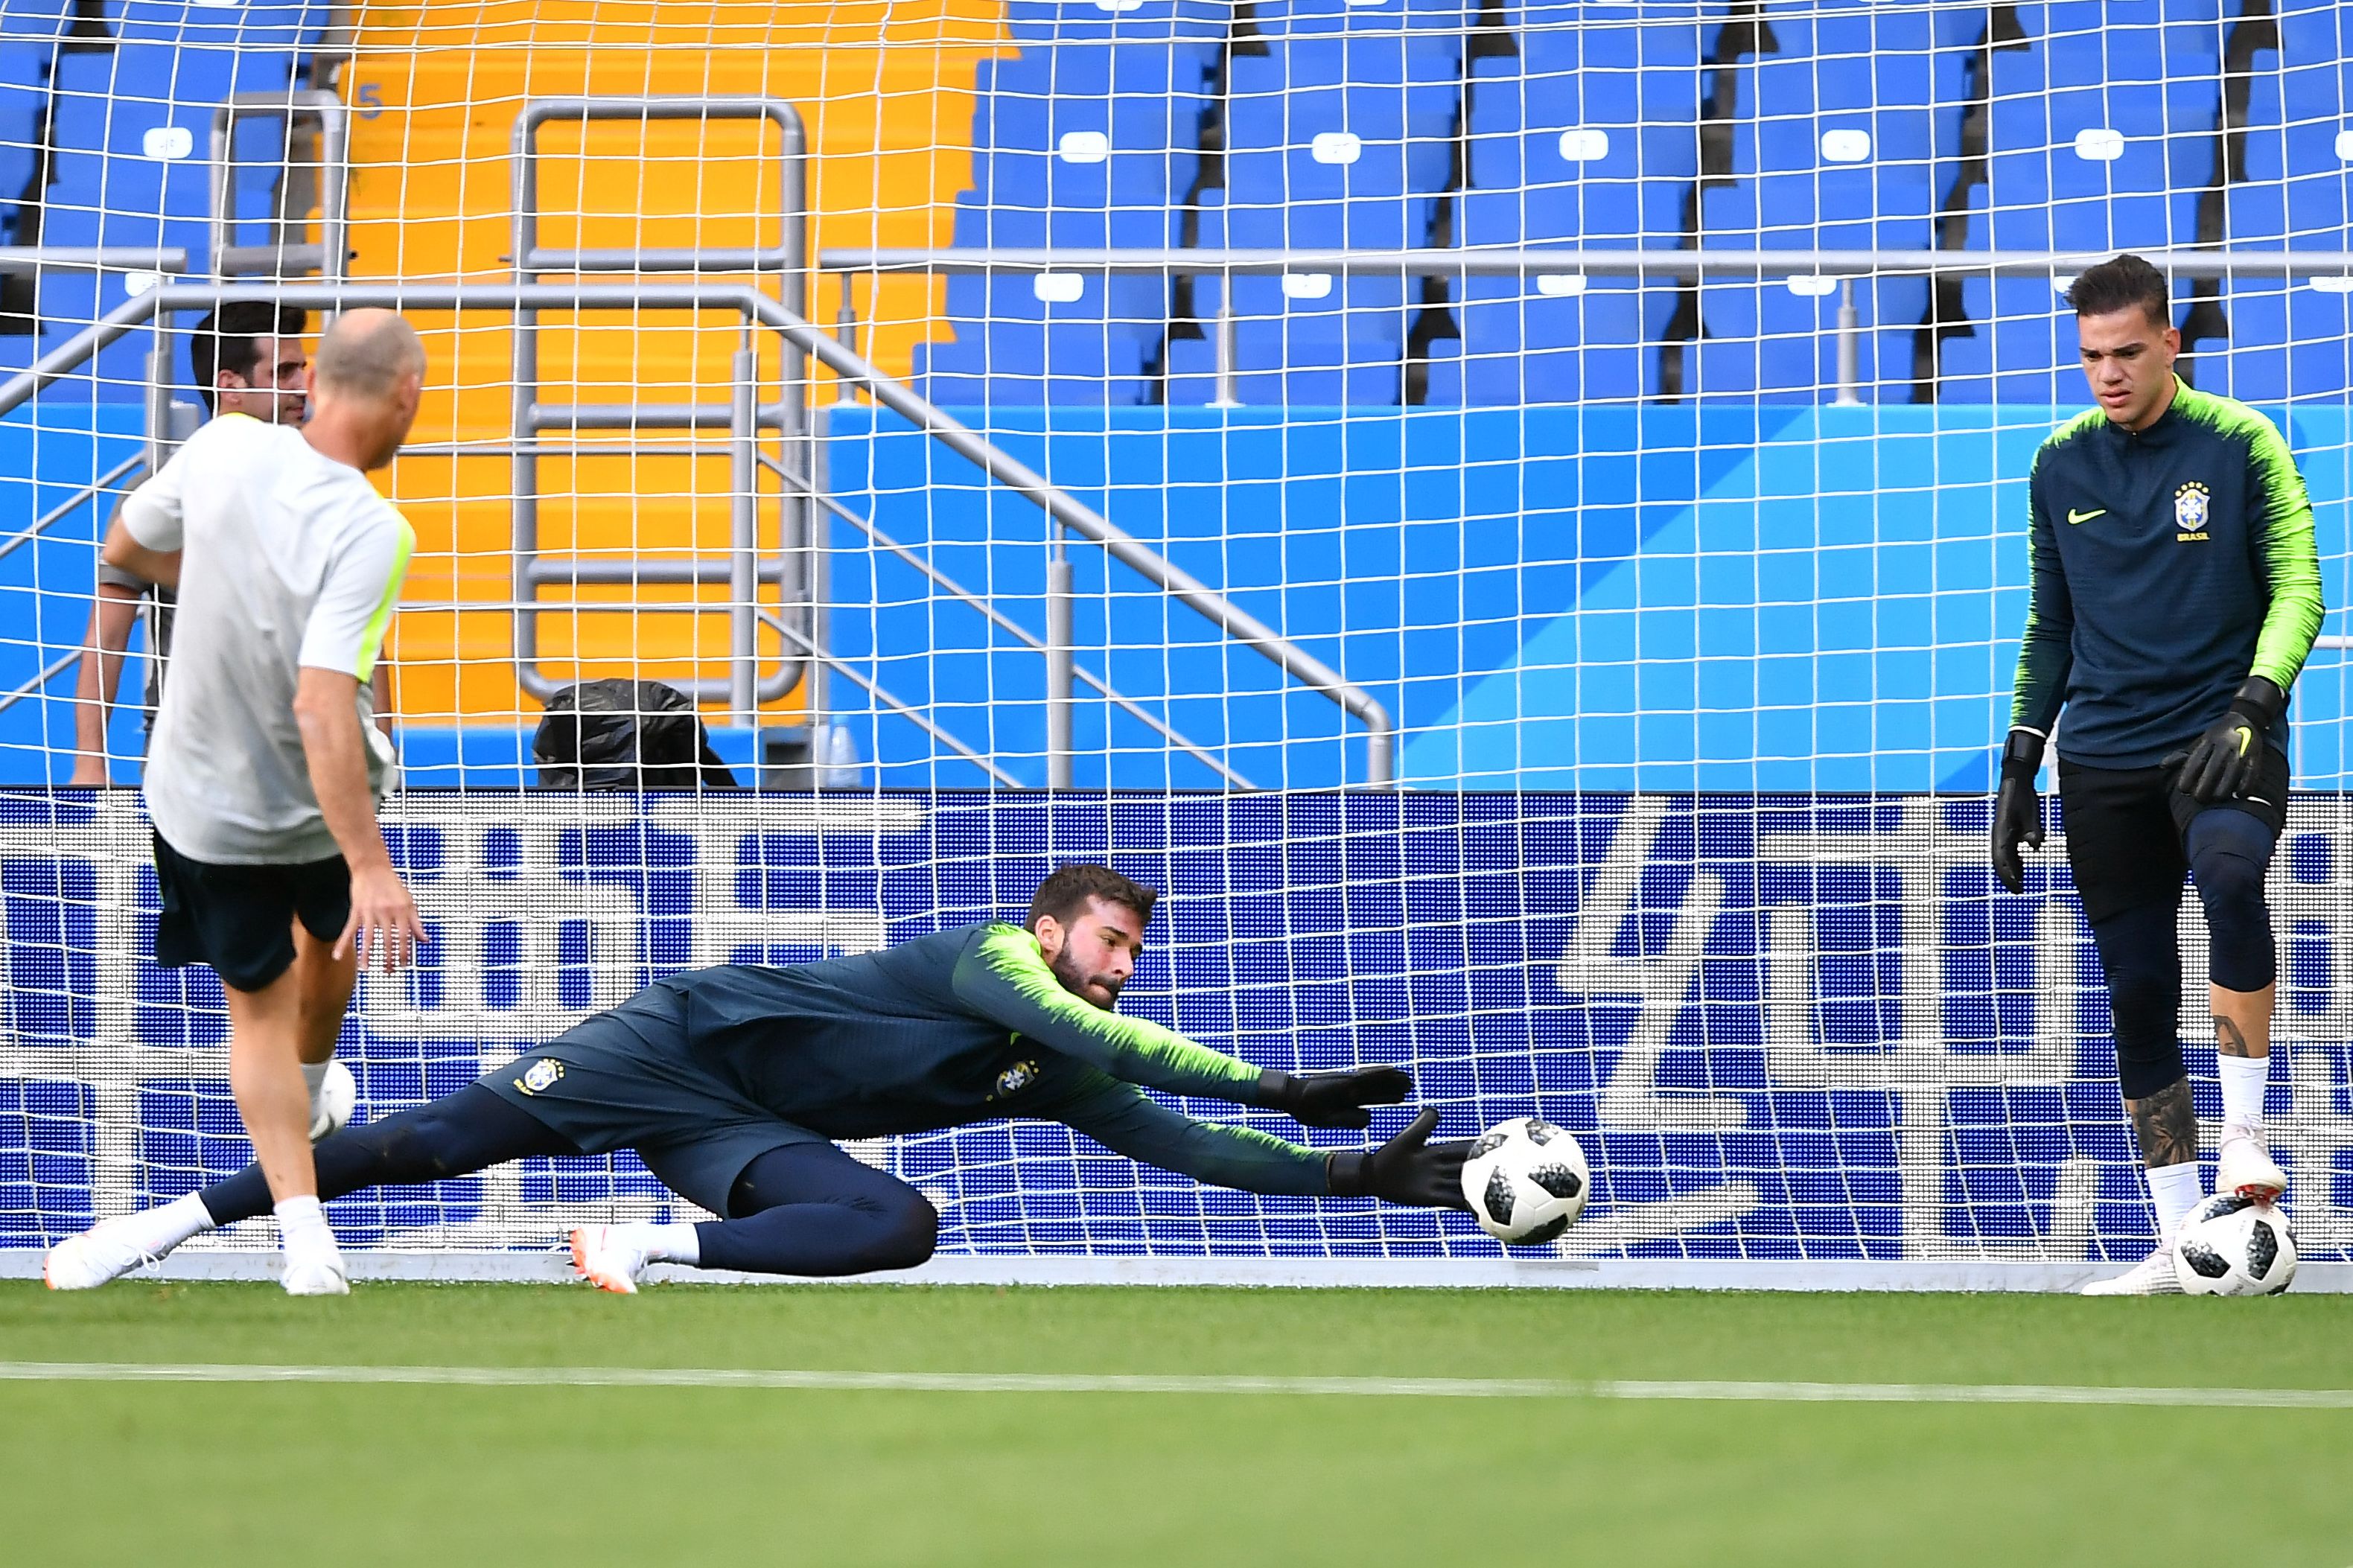 Brazil's goalkeeper Alisson (C) and Brazil's goalkeeper Ederson (R) take part in a training session at the Rostov Arena in Rostov-on-Don on June 16, 2018 on the eve of the Russia 2018 World Cup Group E football match between Brazil and Switzerland. (Photo by JOE KLAMAR / AFP)        (Photo credit should read JOE KLAMAR/AFP/Getty Images)